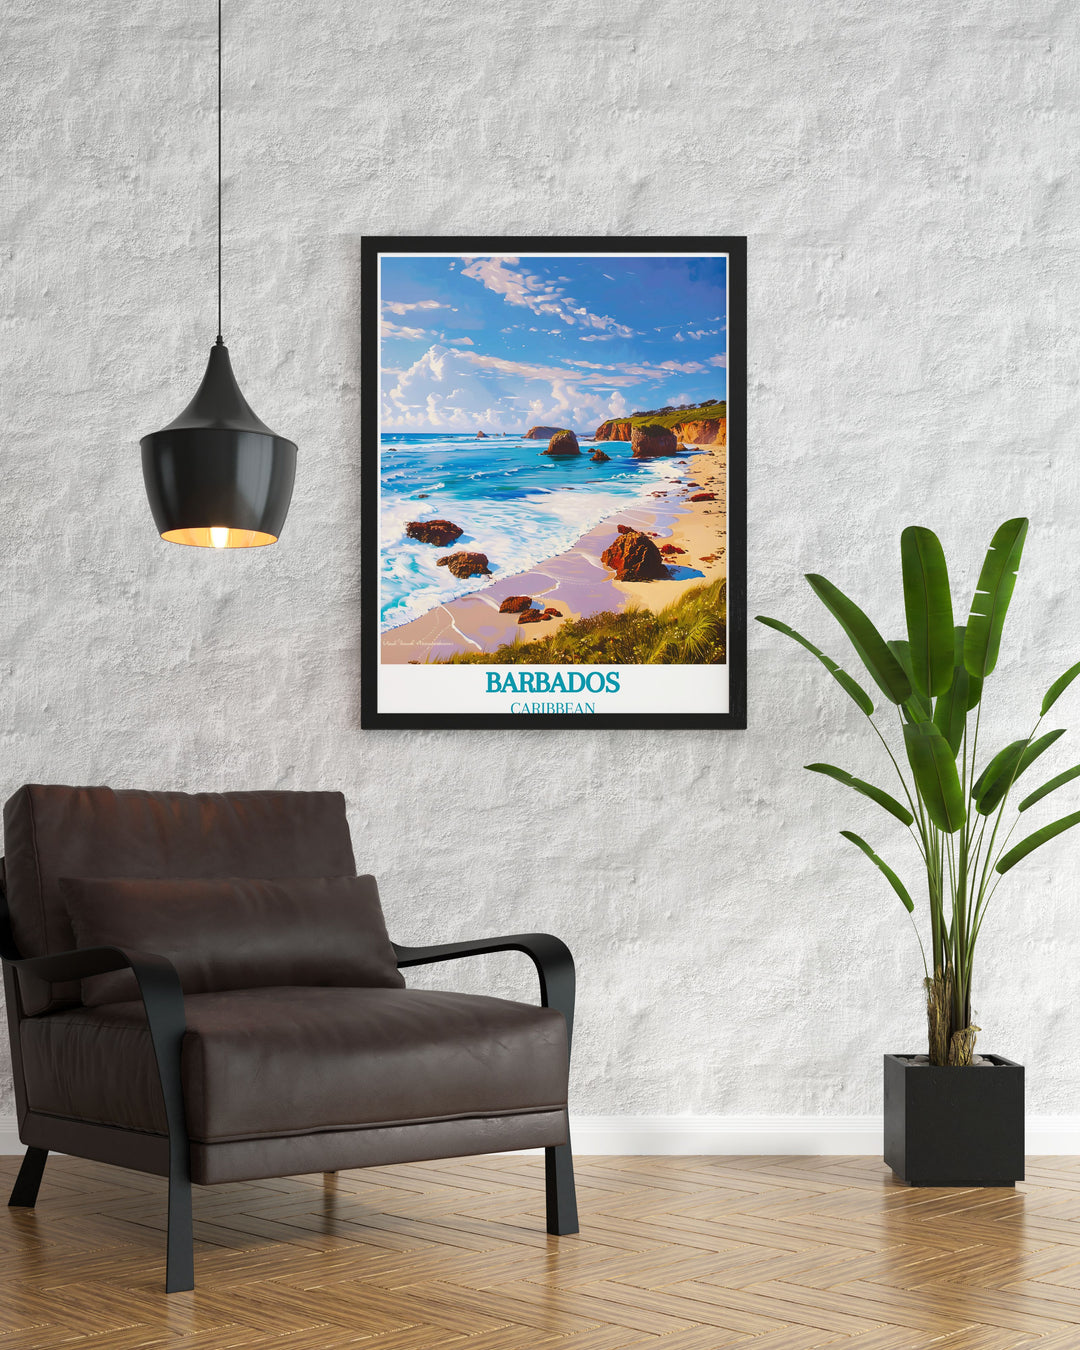 Caribbean wall decor with a panoramic view of the islands, capturing the colorful and dynamic essence of Caribbean culture and landscapes.